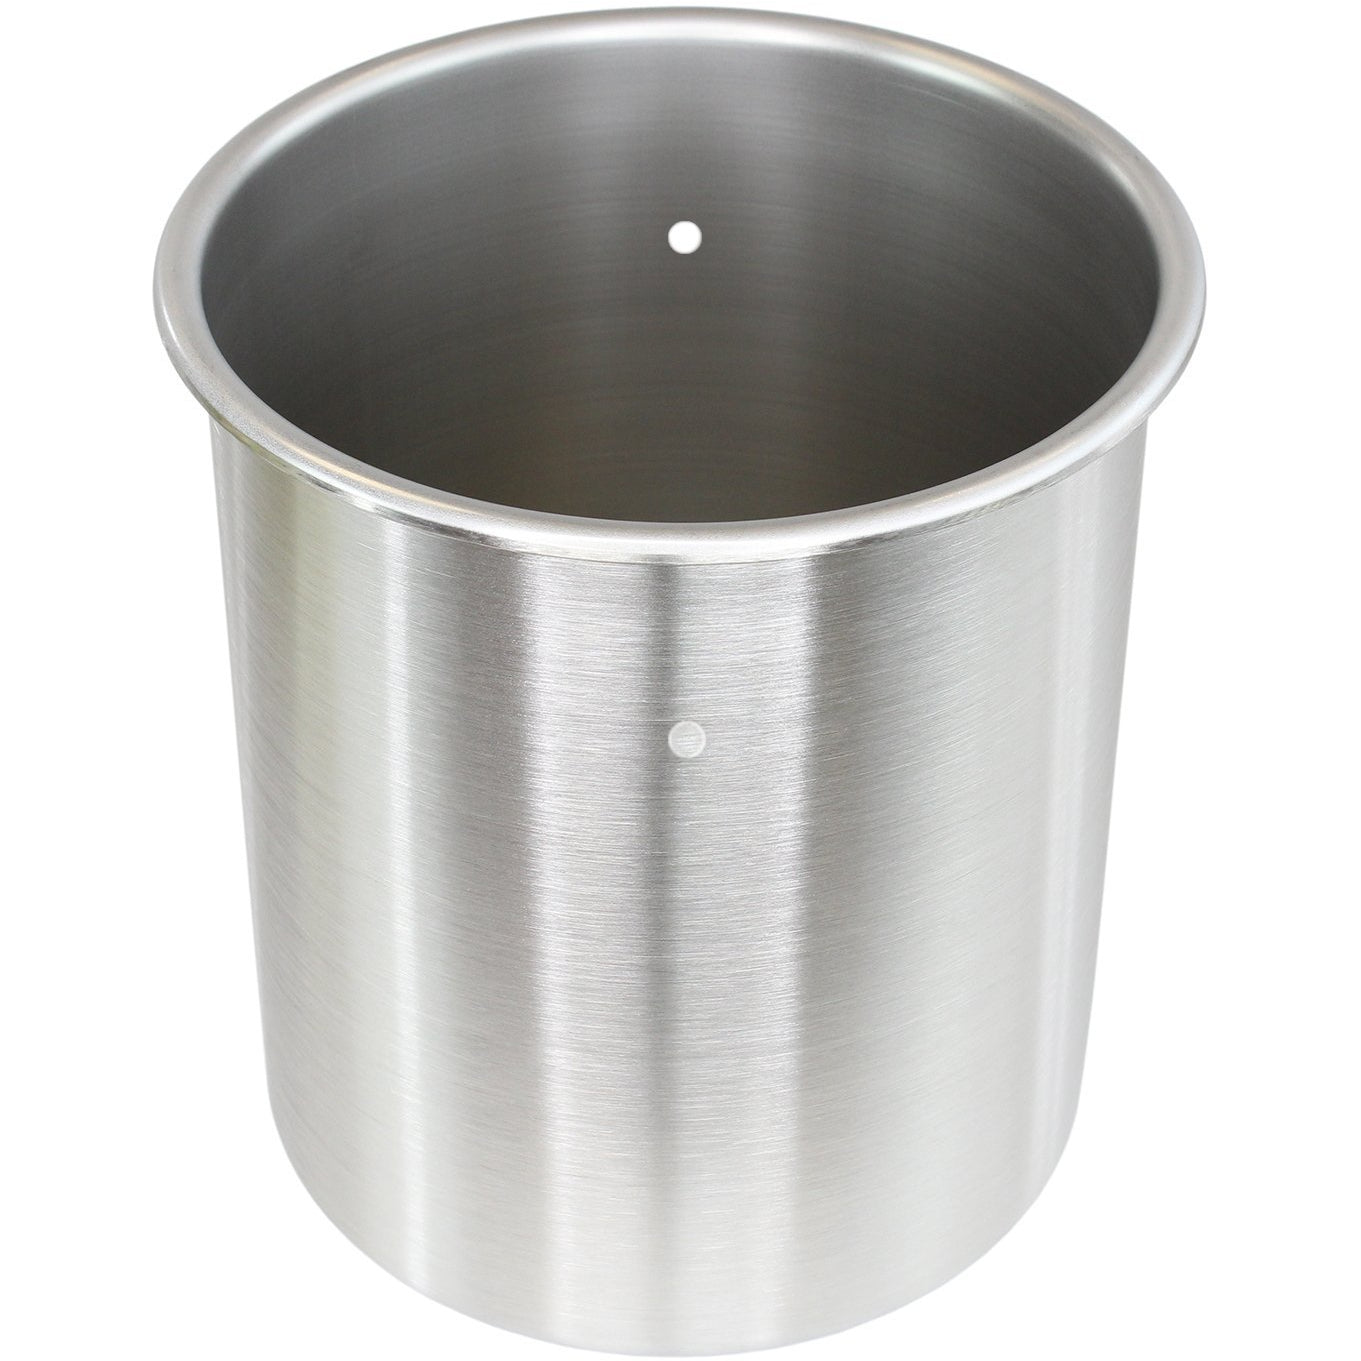 BVV, 1.5 Gallon Tall Stainless Steel COLD TRAP - POT ONLY